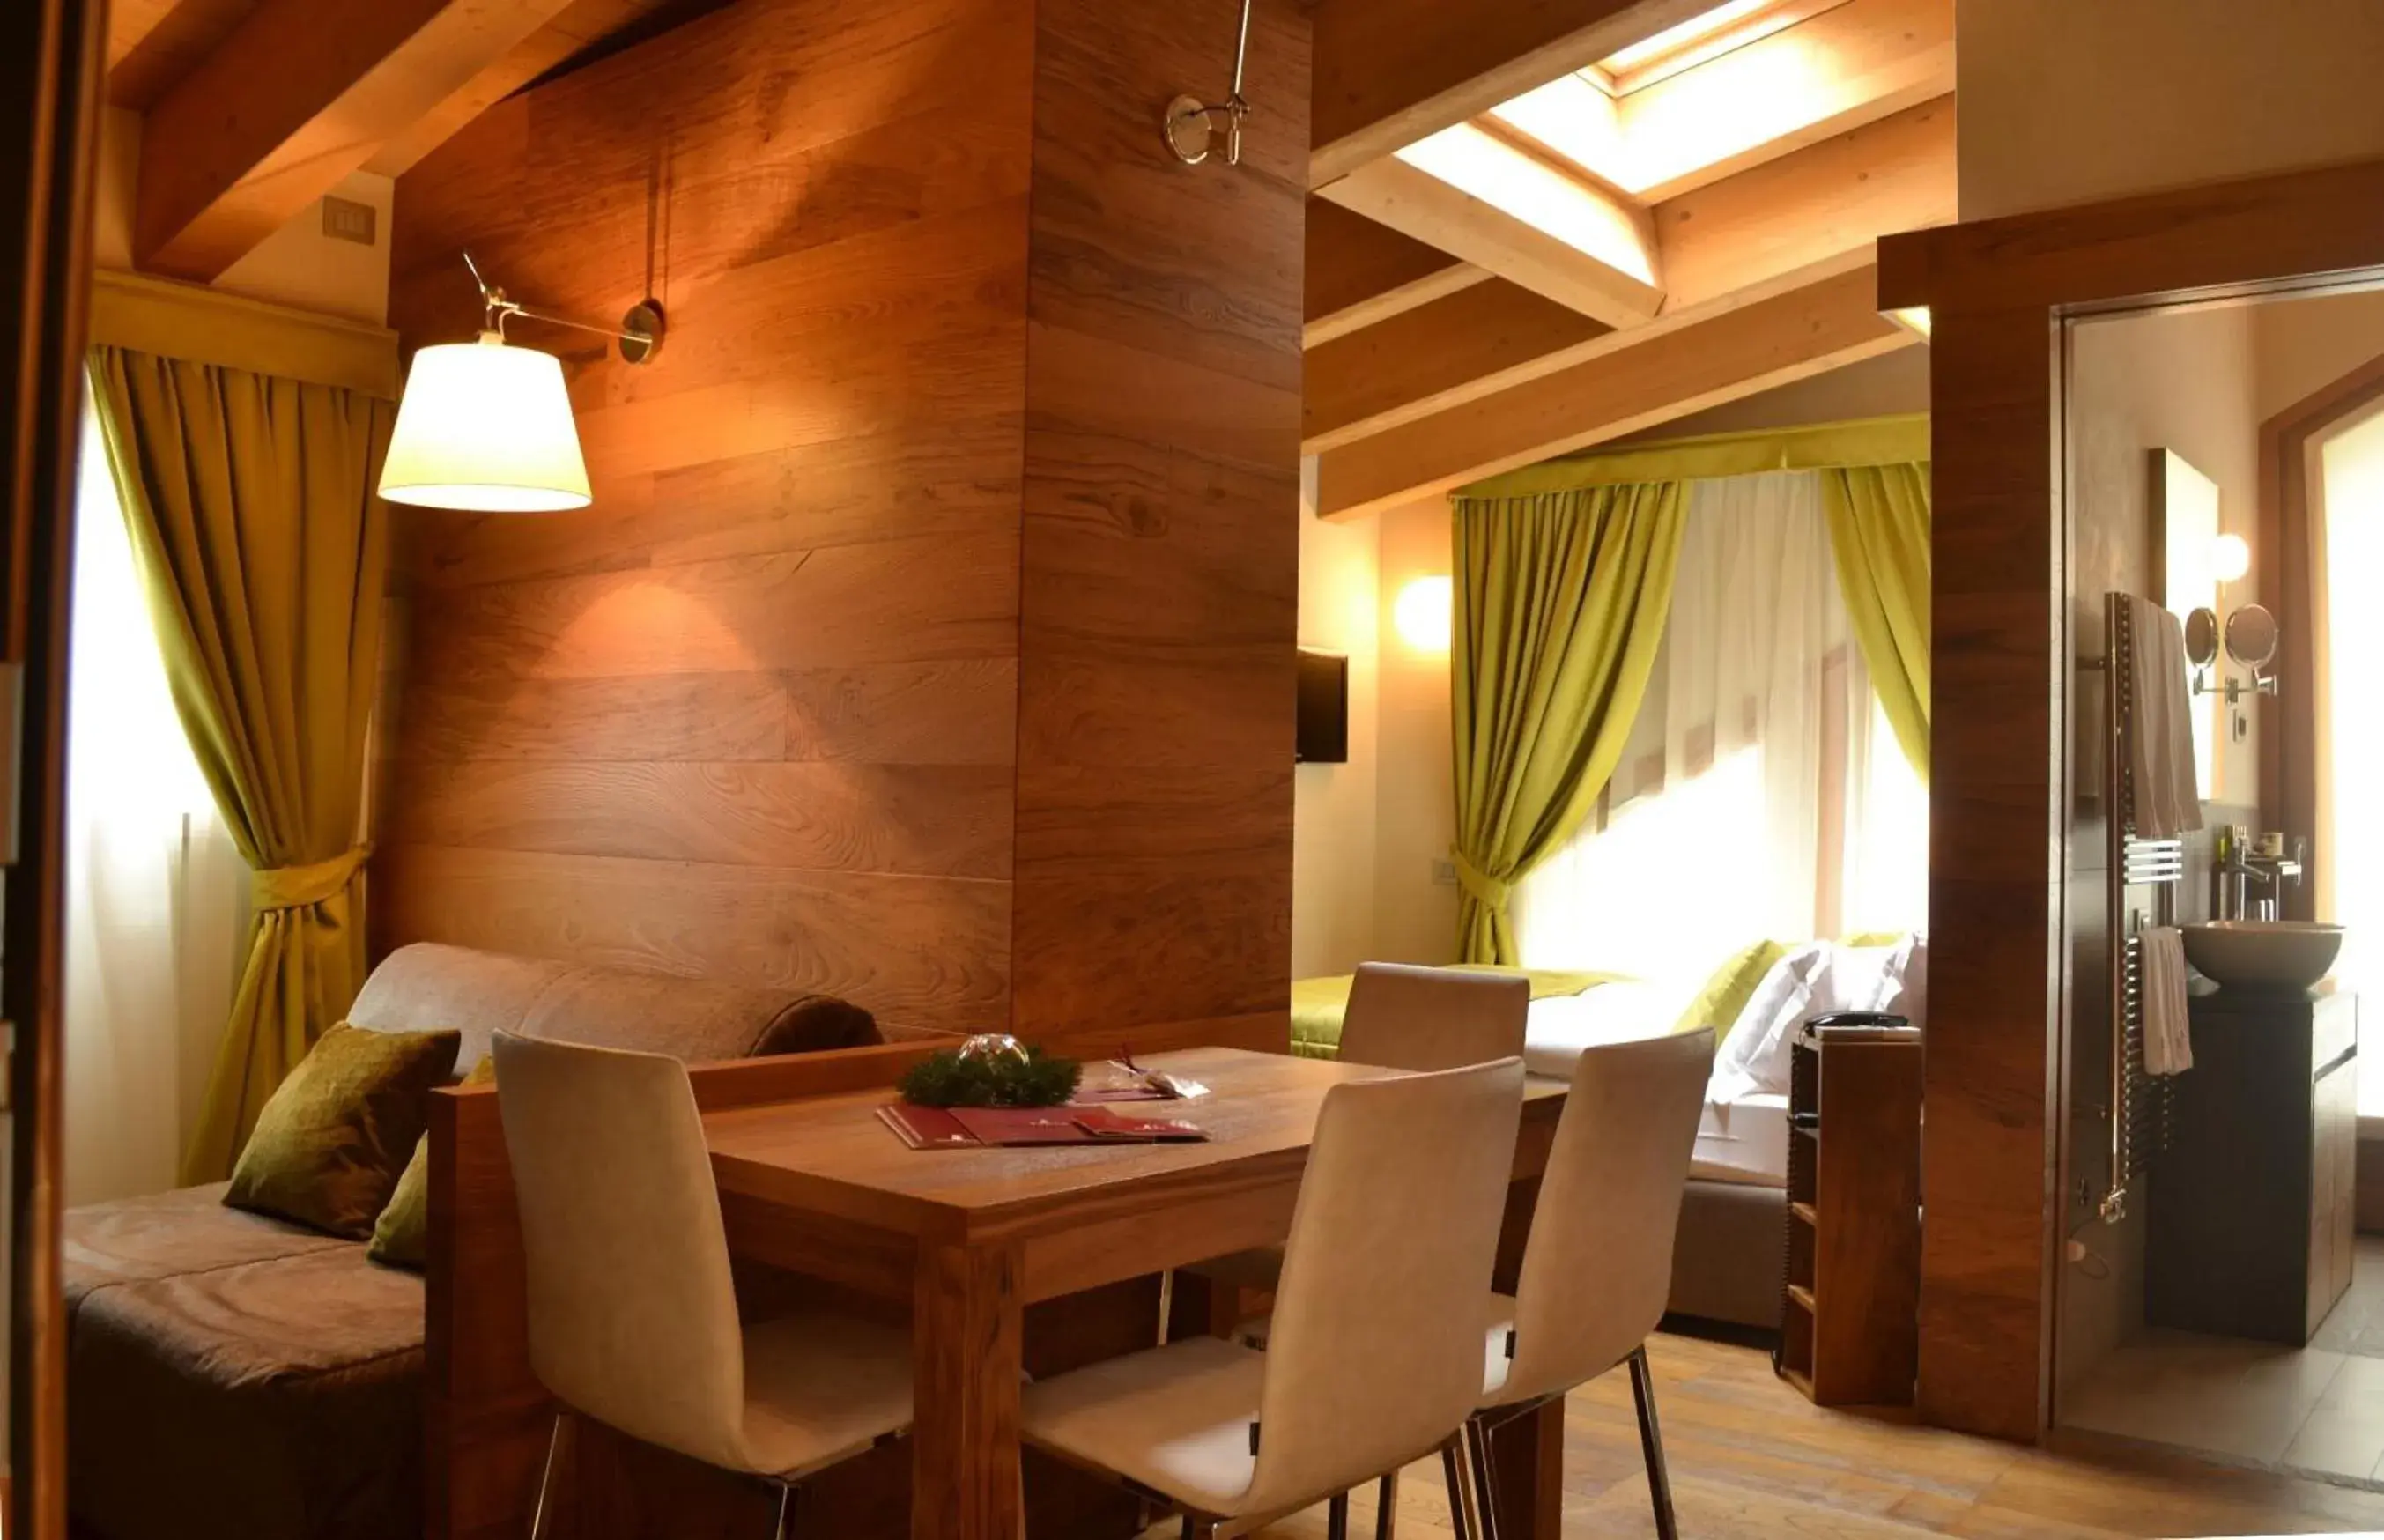 Bathroom, Dining Area in Sottovento Luxury Hospitality